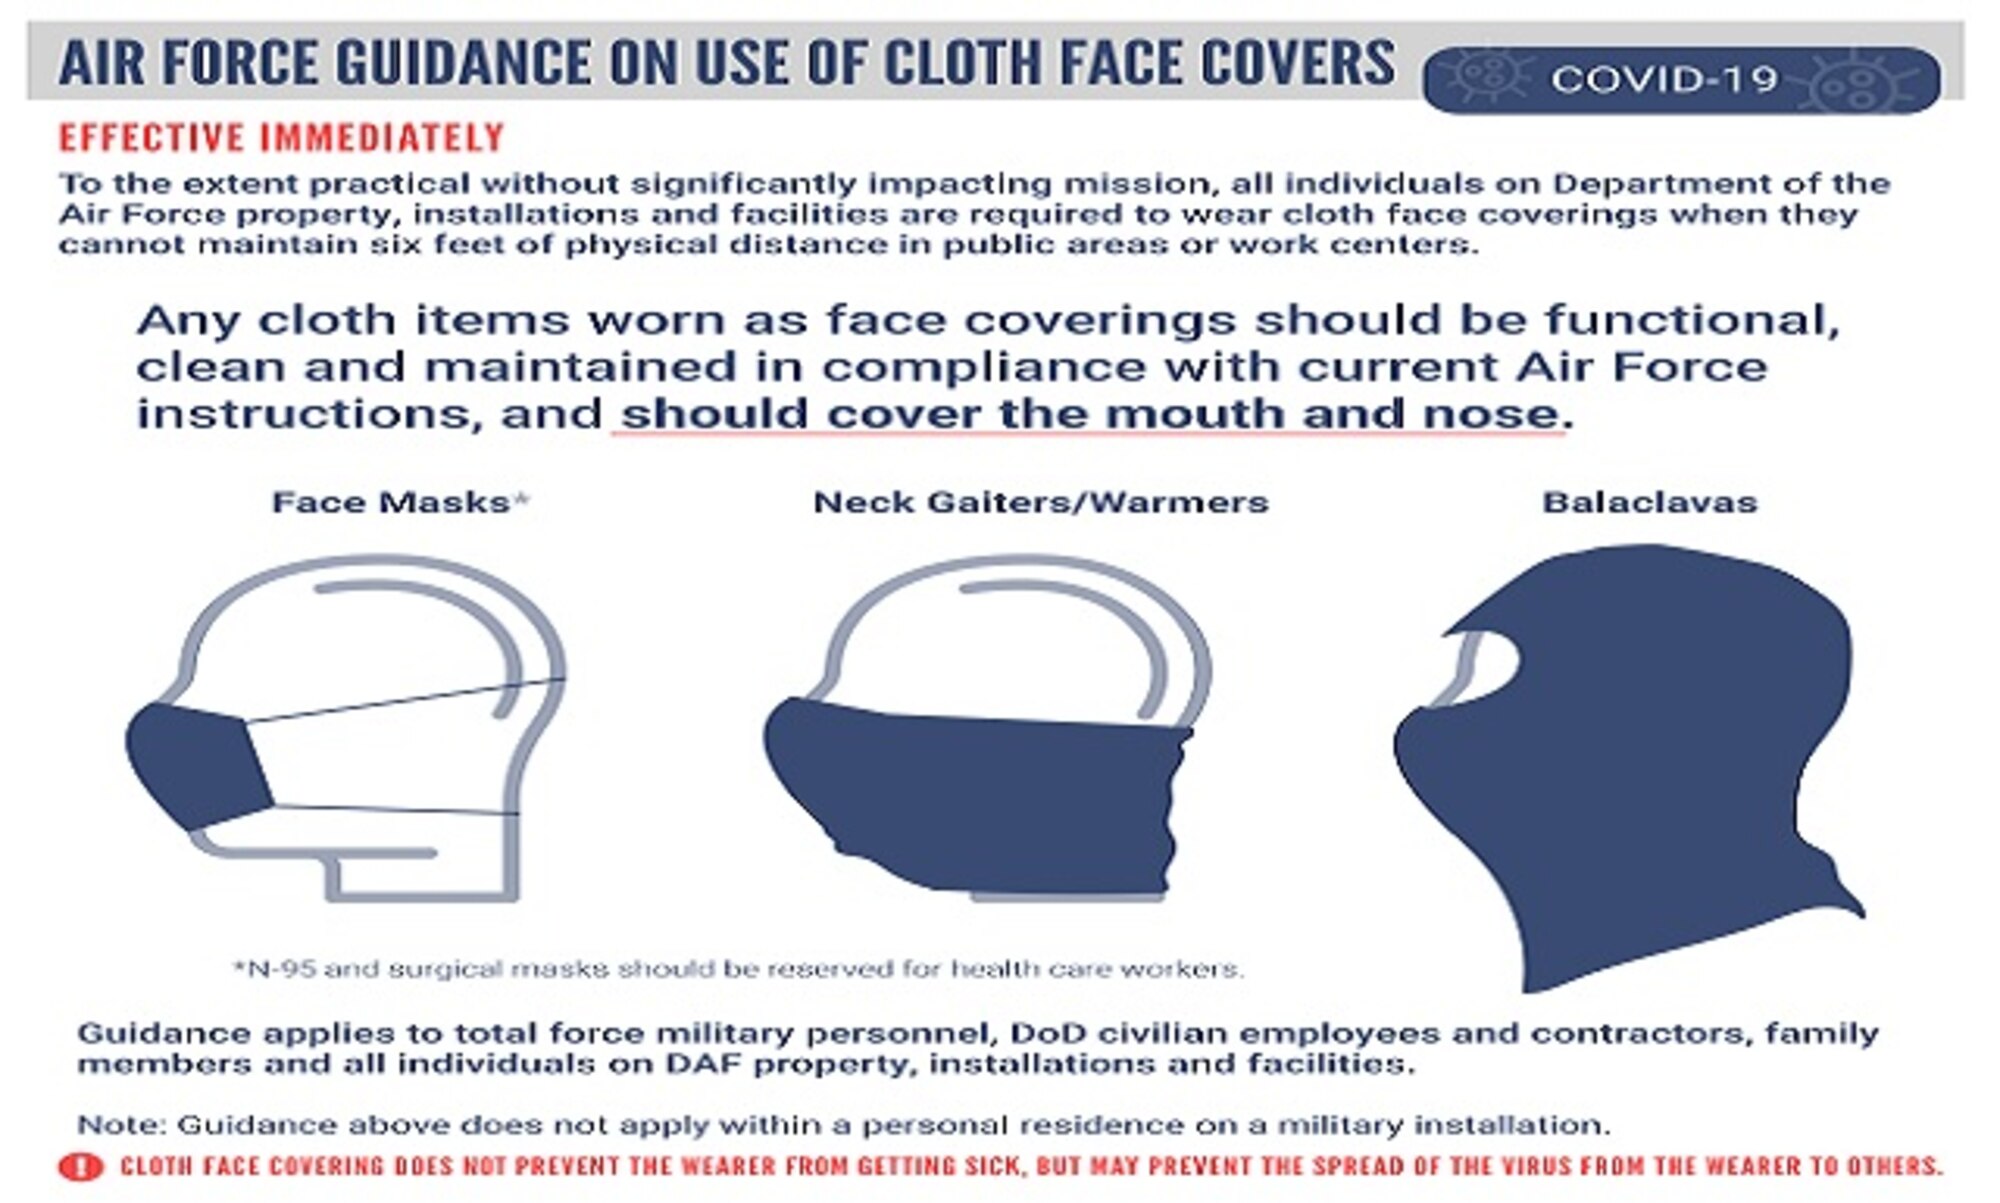 Graphics on COVID mask guidance